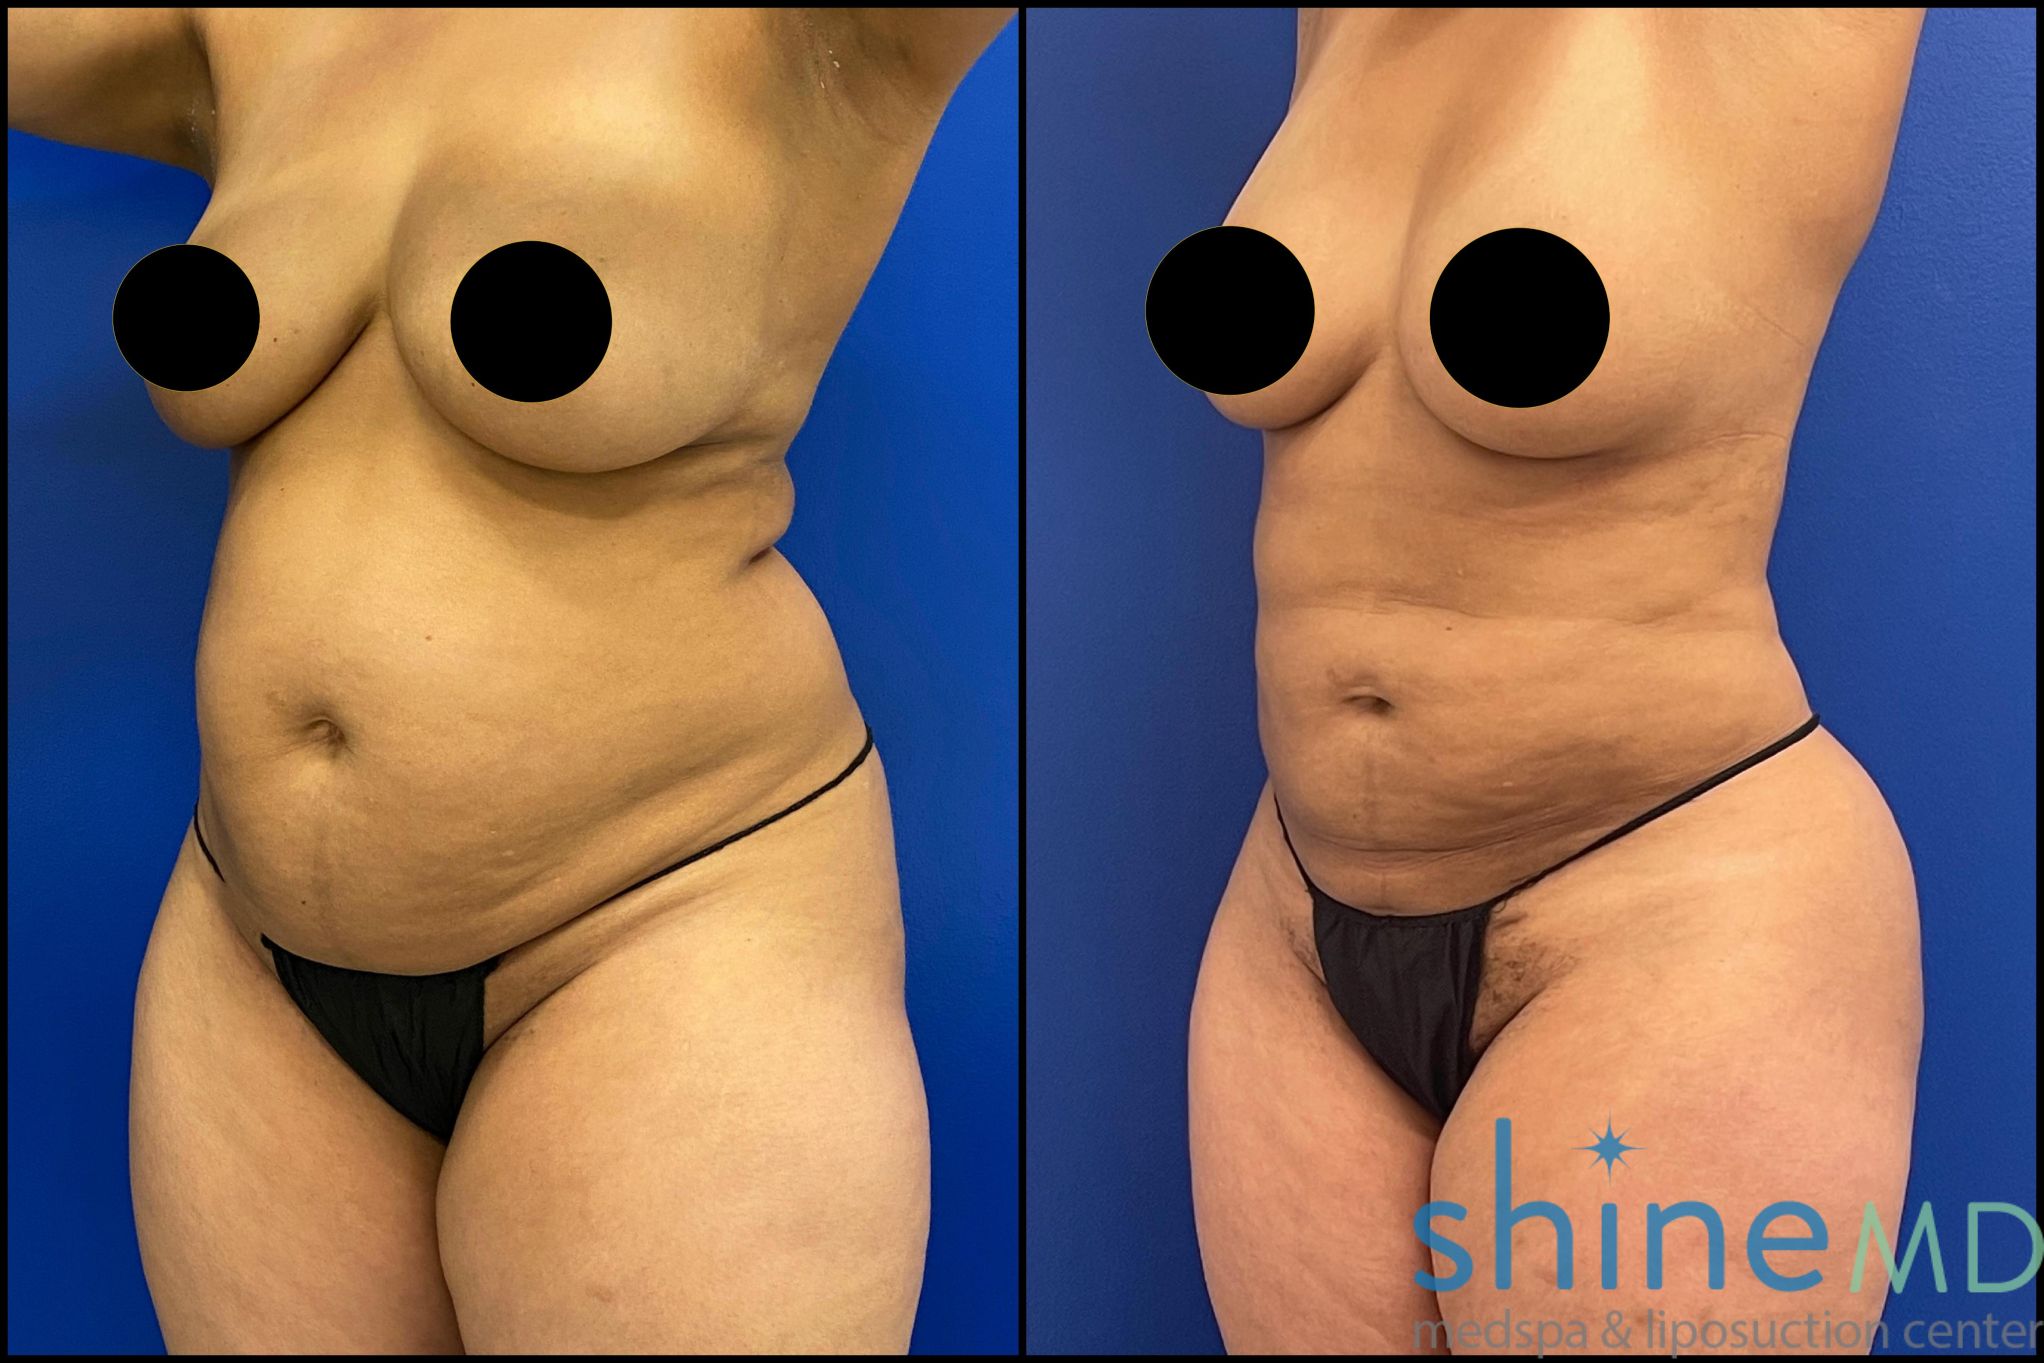 lipo treatment before and after photos